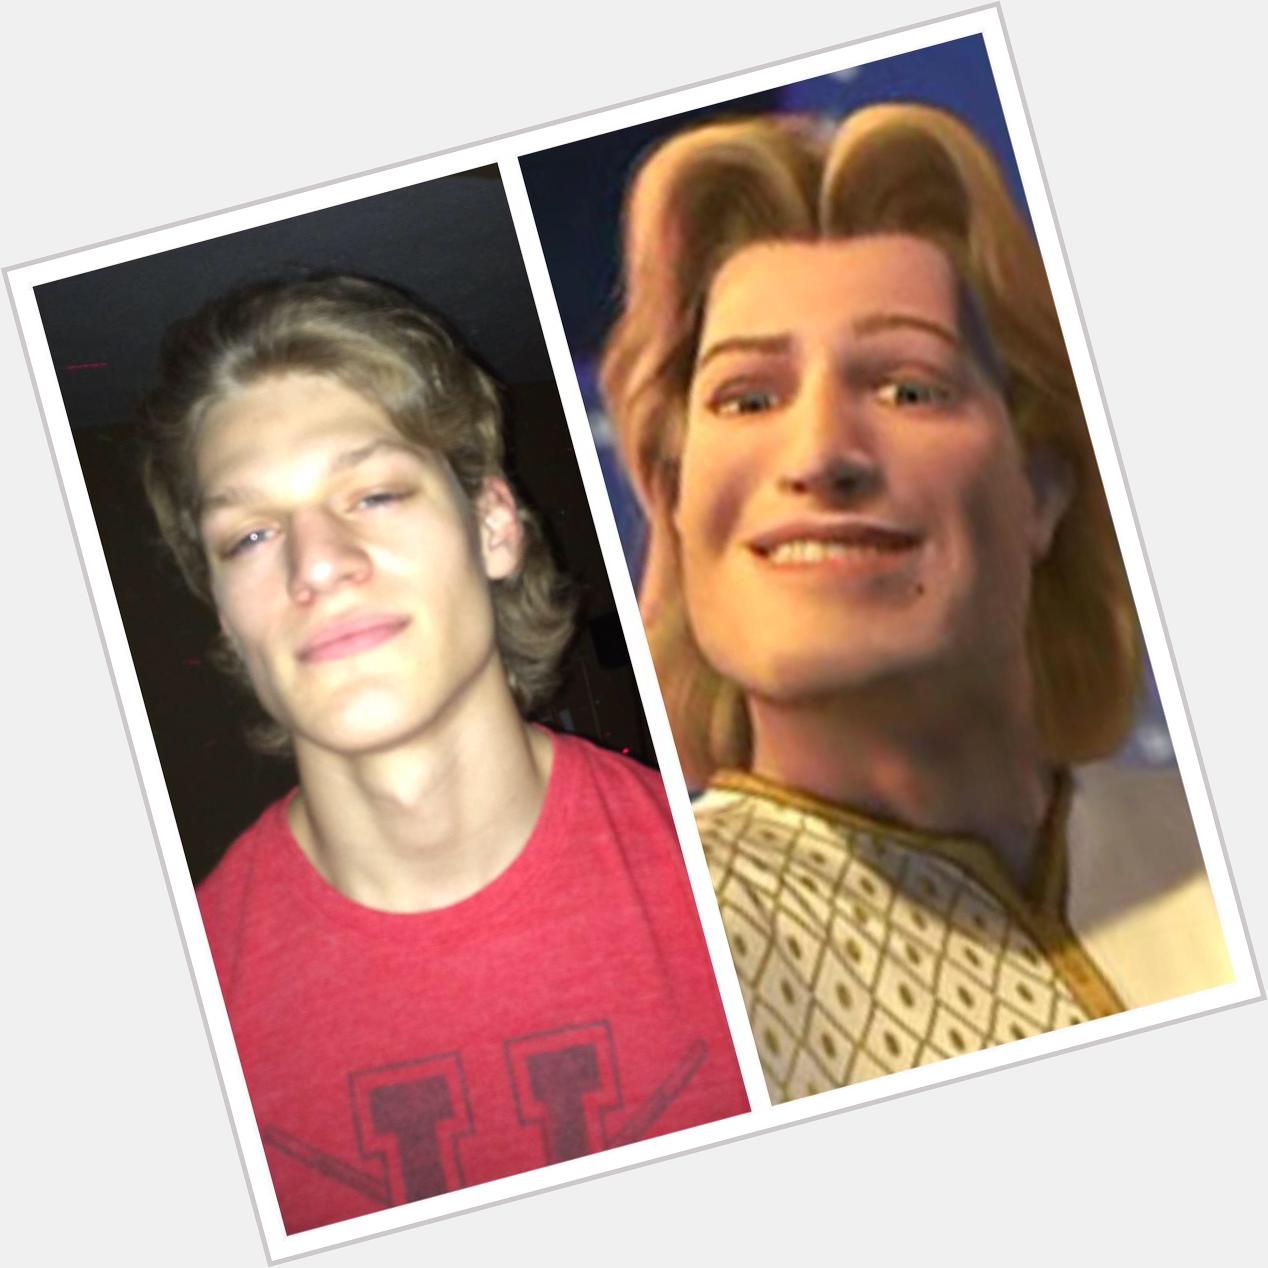 Happy birthday to the prince charming look a like himself   hope it\s a good one 